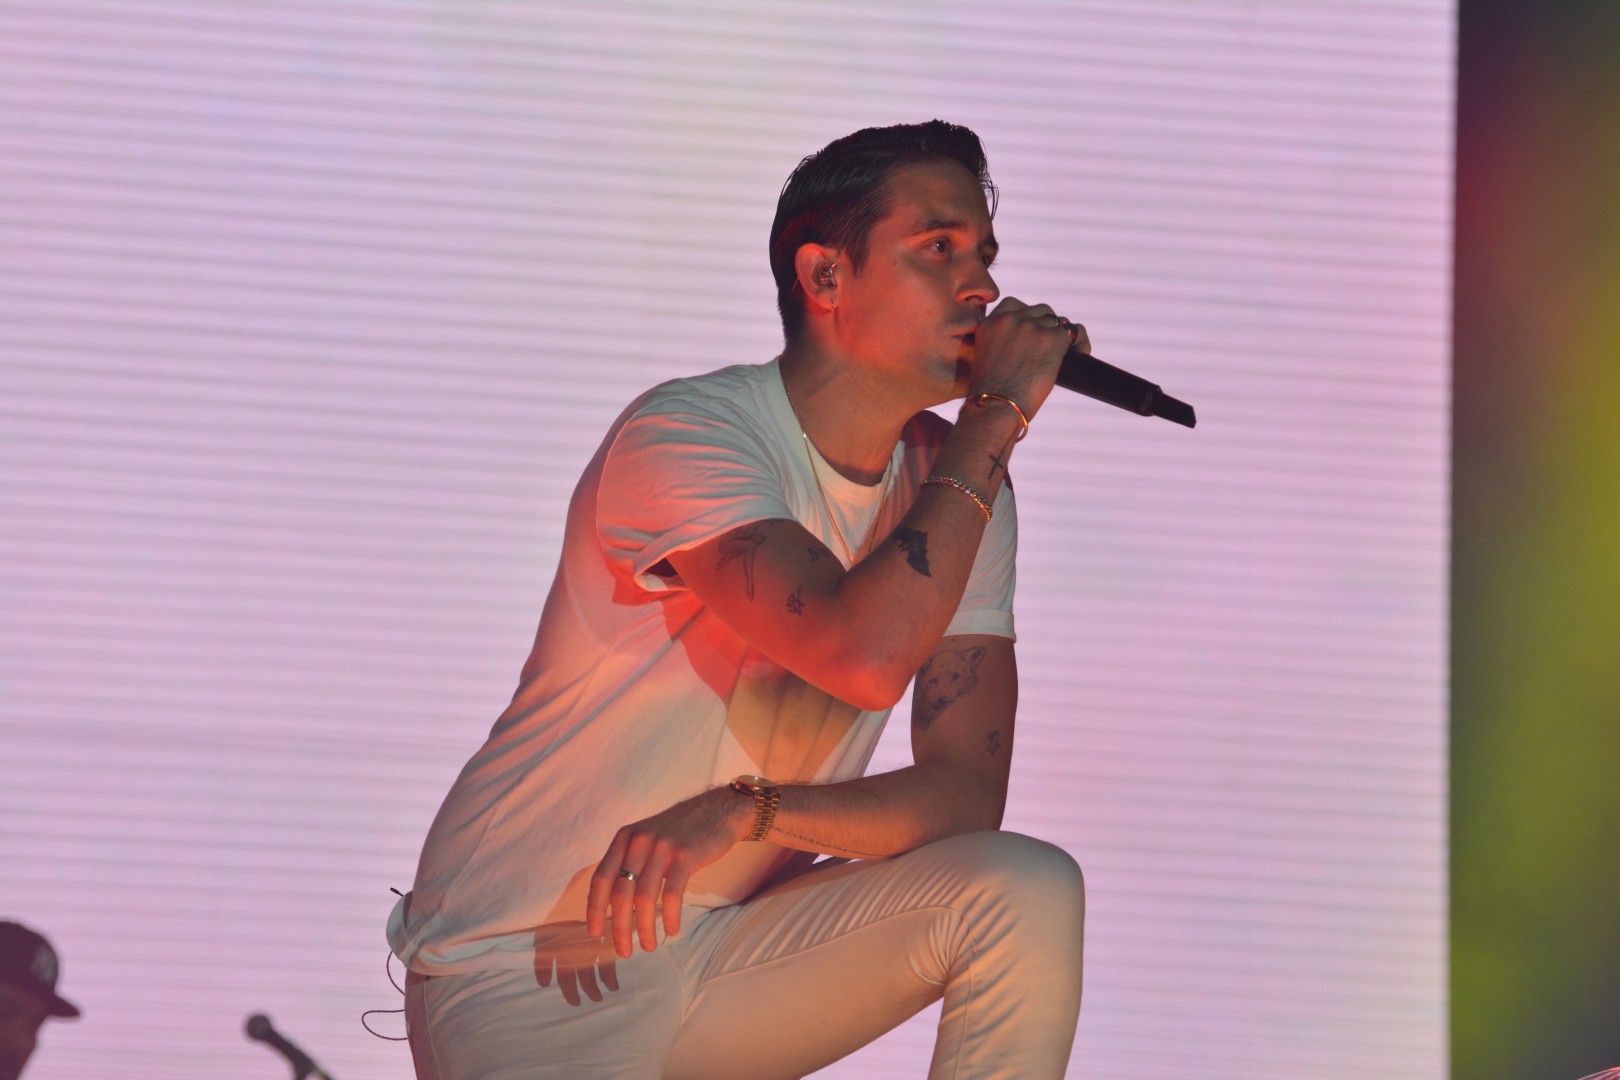 G-Eazy at Neversea Beach in Constanta on July 4, 2019 (bb311c6d03)